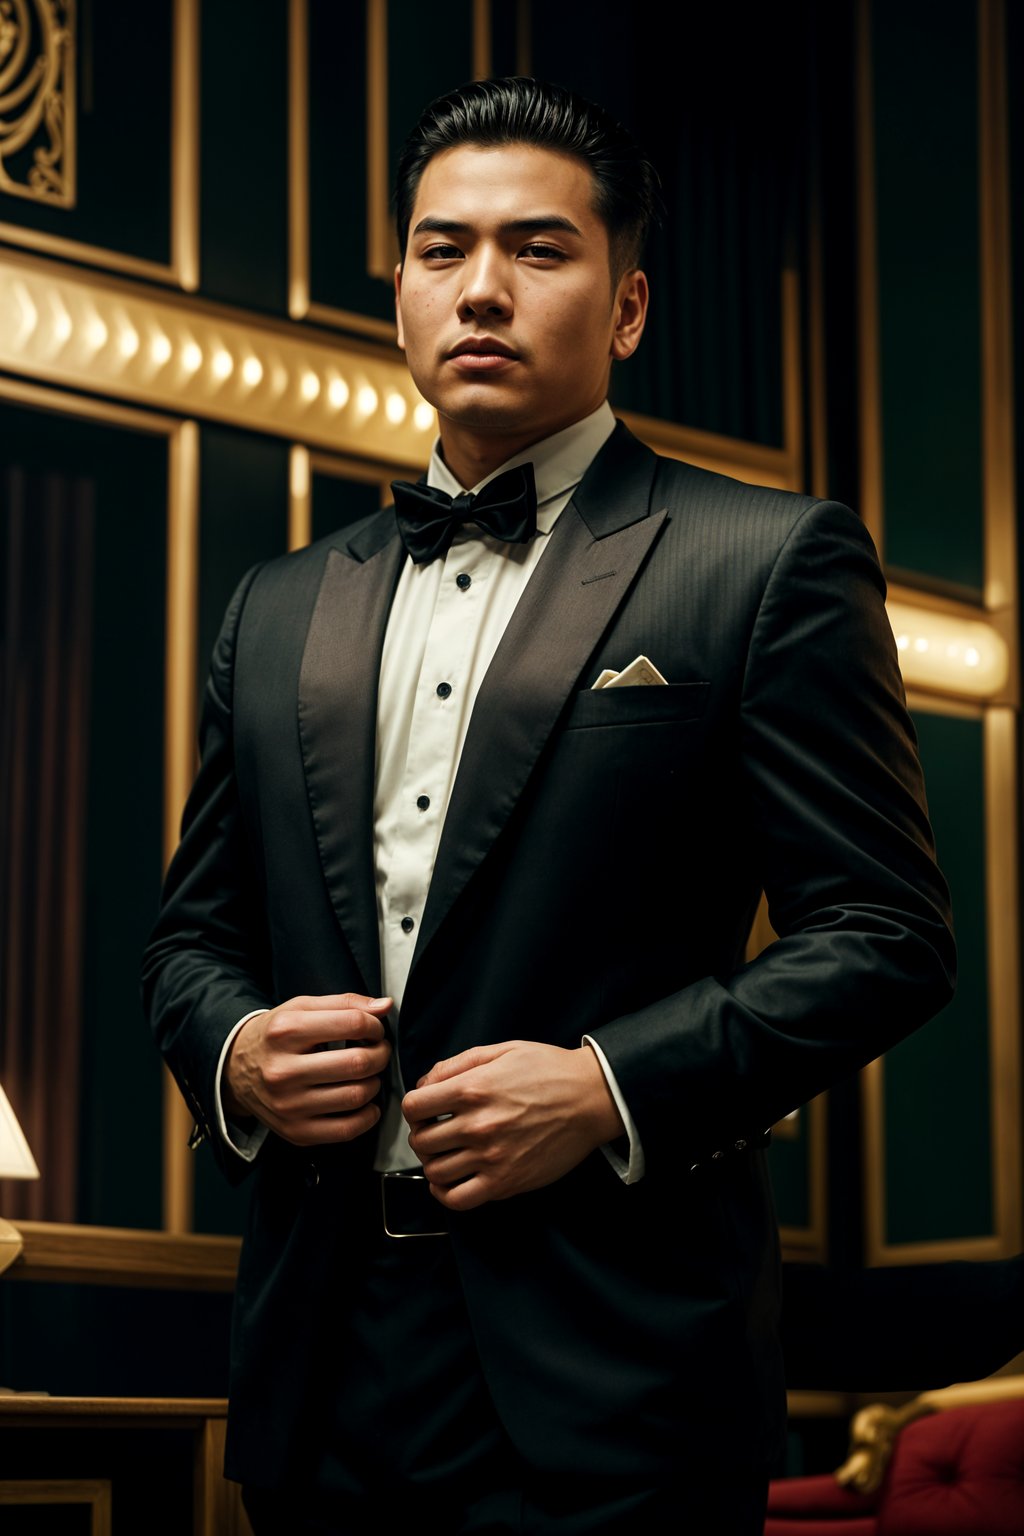 beautiful man as a mobster, mafia, mafia outfit, tailored suits, chunky gold jewelry, mafia aesthetic, flashy, glamorous, luxury, loud, Goodfellas, The Sopranos, Mob Wives, opulence, confidence